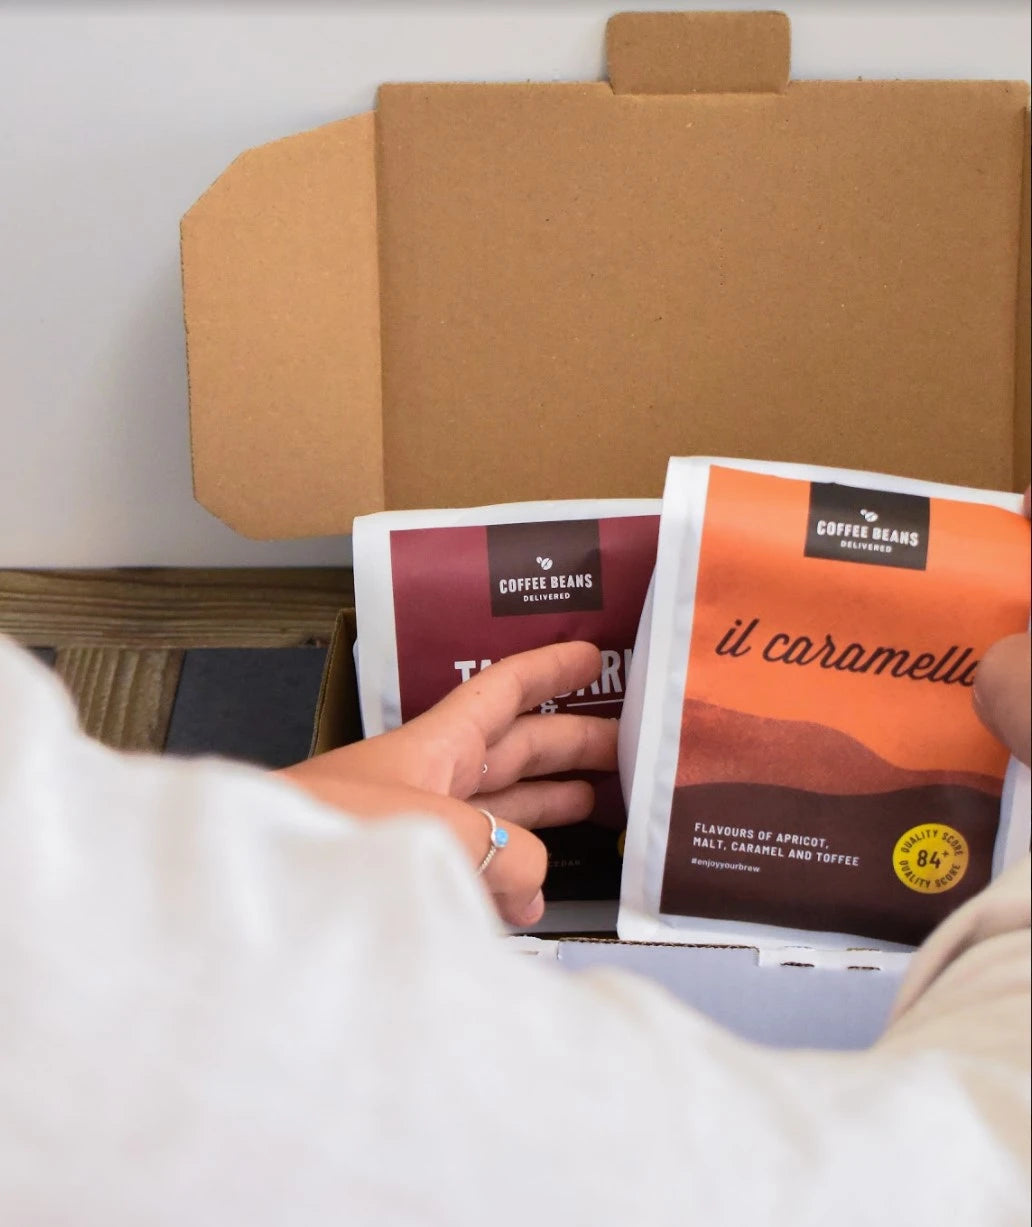 Two bags of coffee beans of different blends sit in a box while a person reaches in and grabs a bag of il caramello organic coffee beans